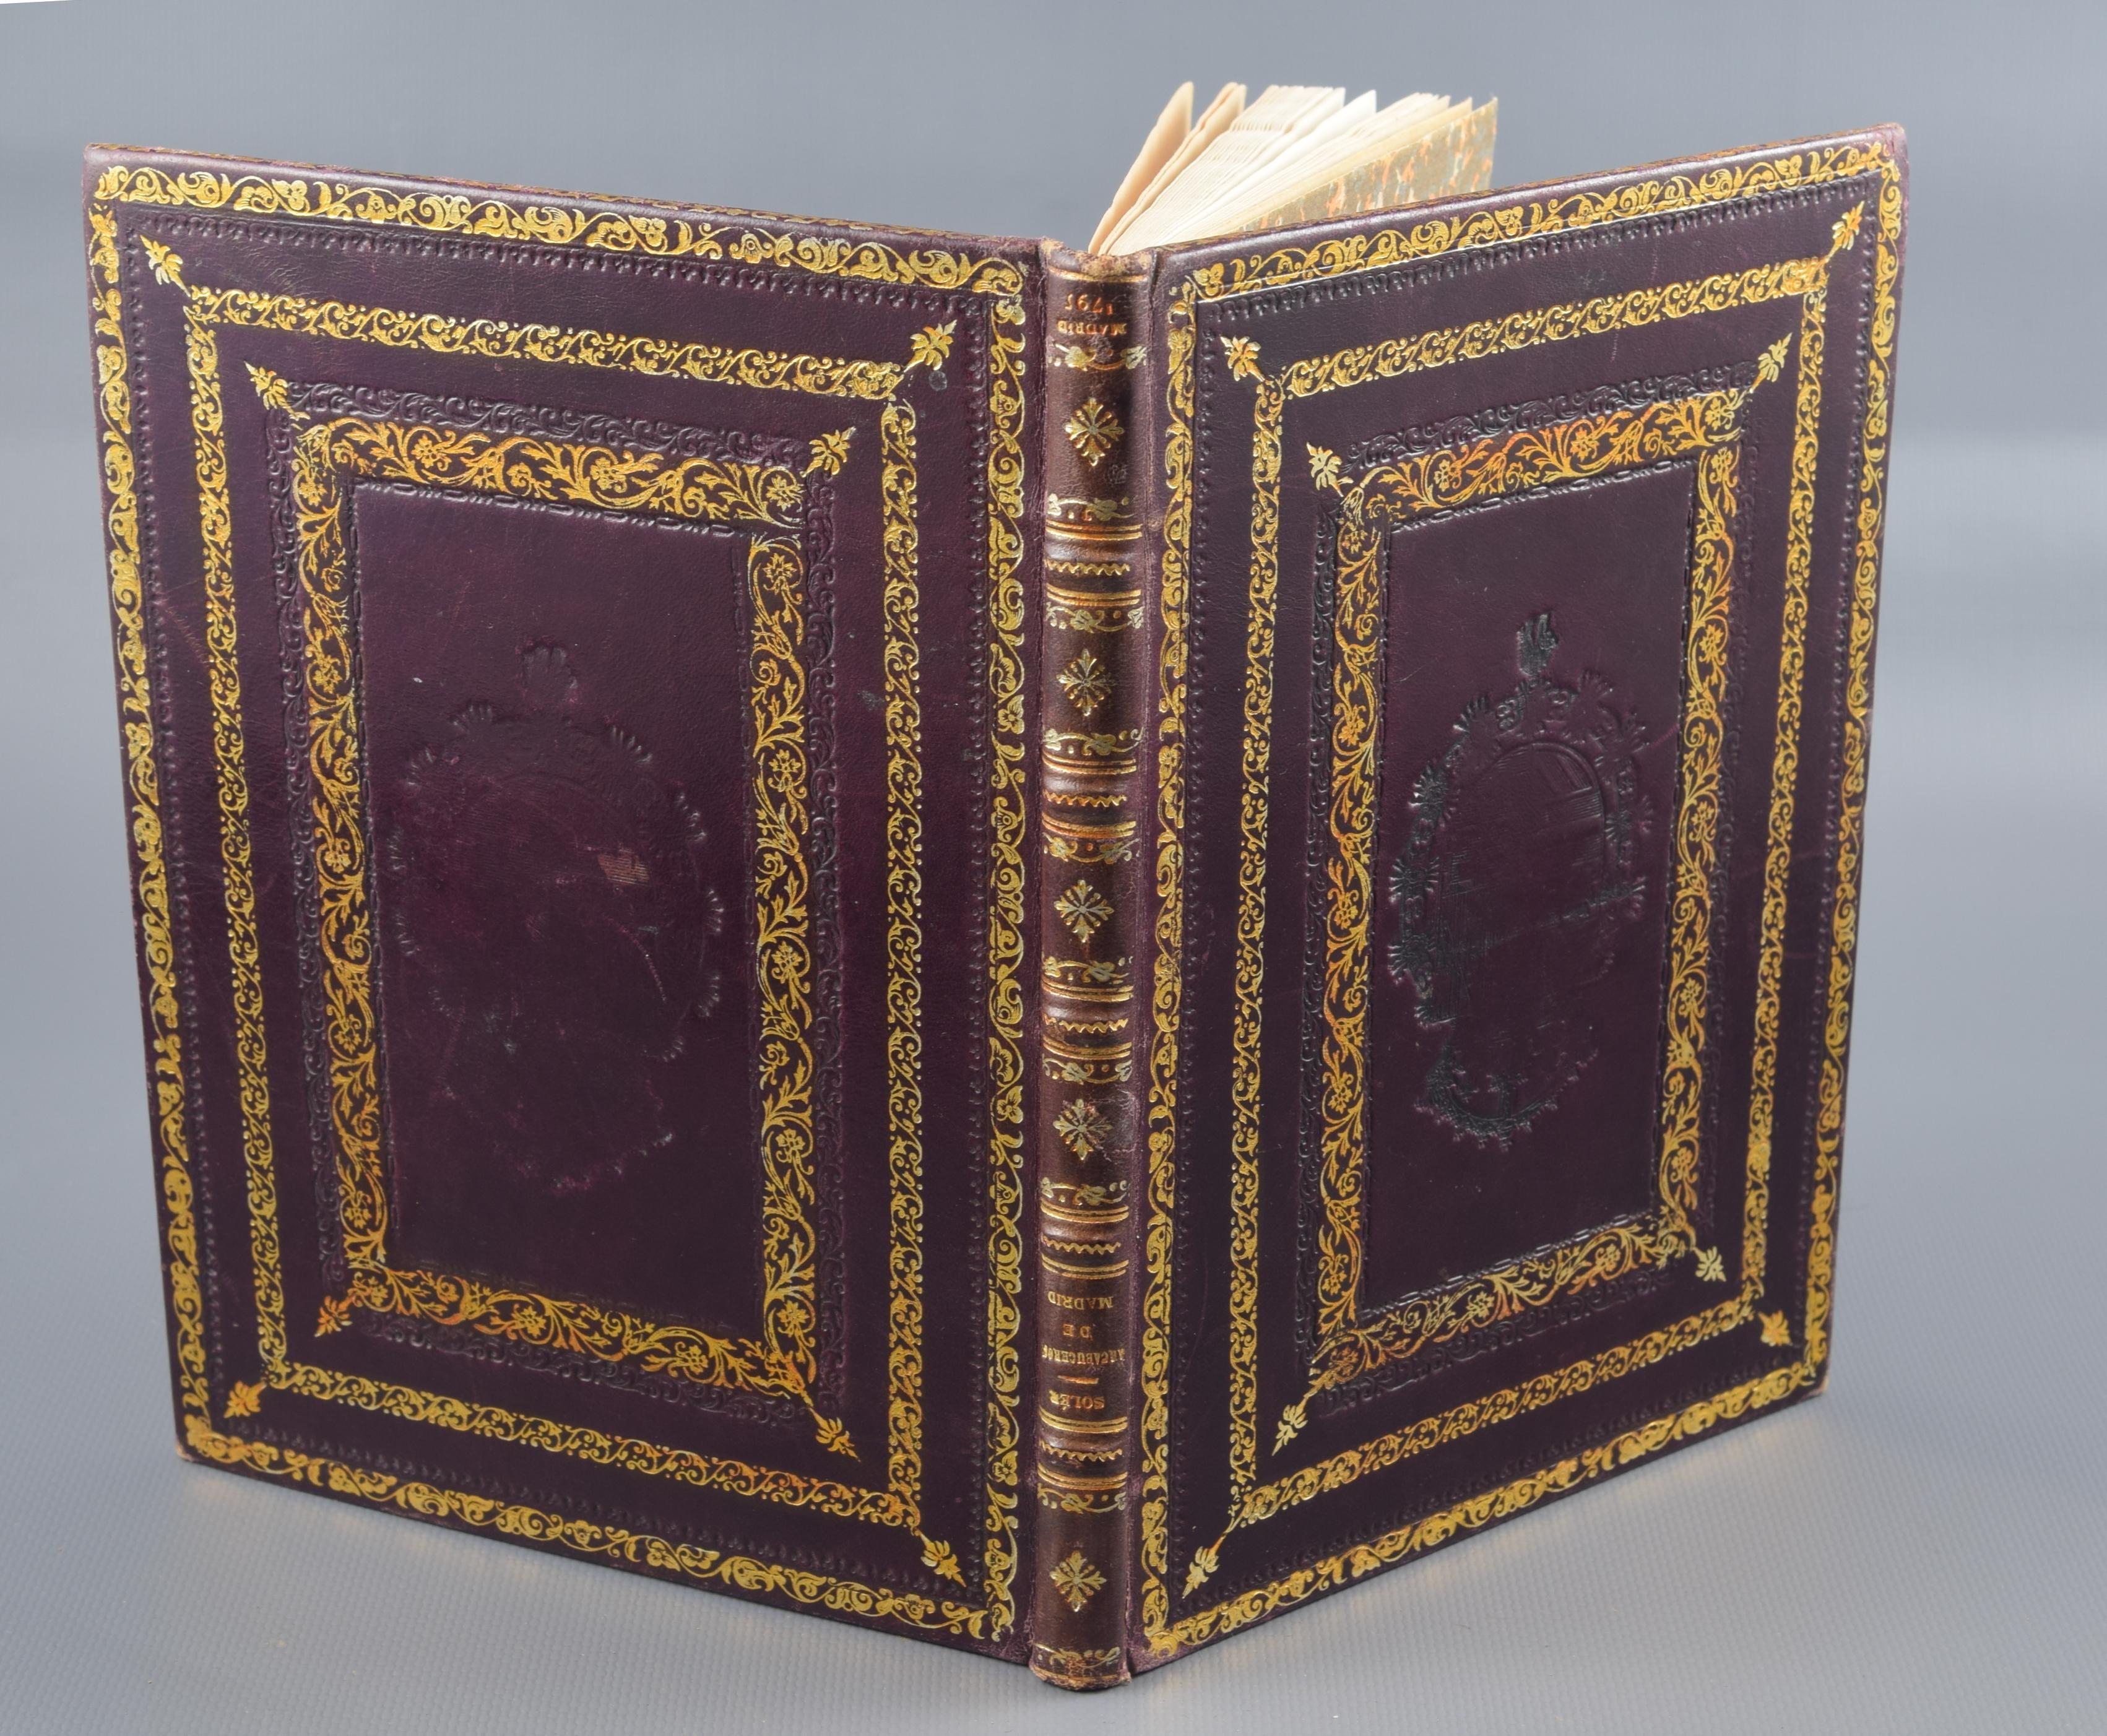 Historical summary of the arcabuceros of Madrid ... Soler, Isidro (fl. circa 1795), Madrid, 1795. Original, leather binding. 86 pages perfect state of conservation.
